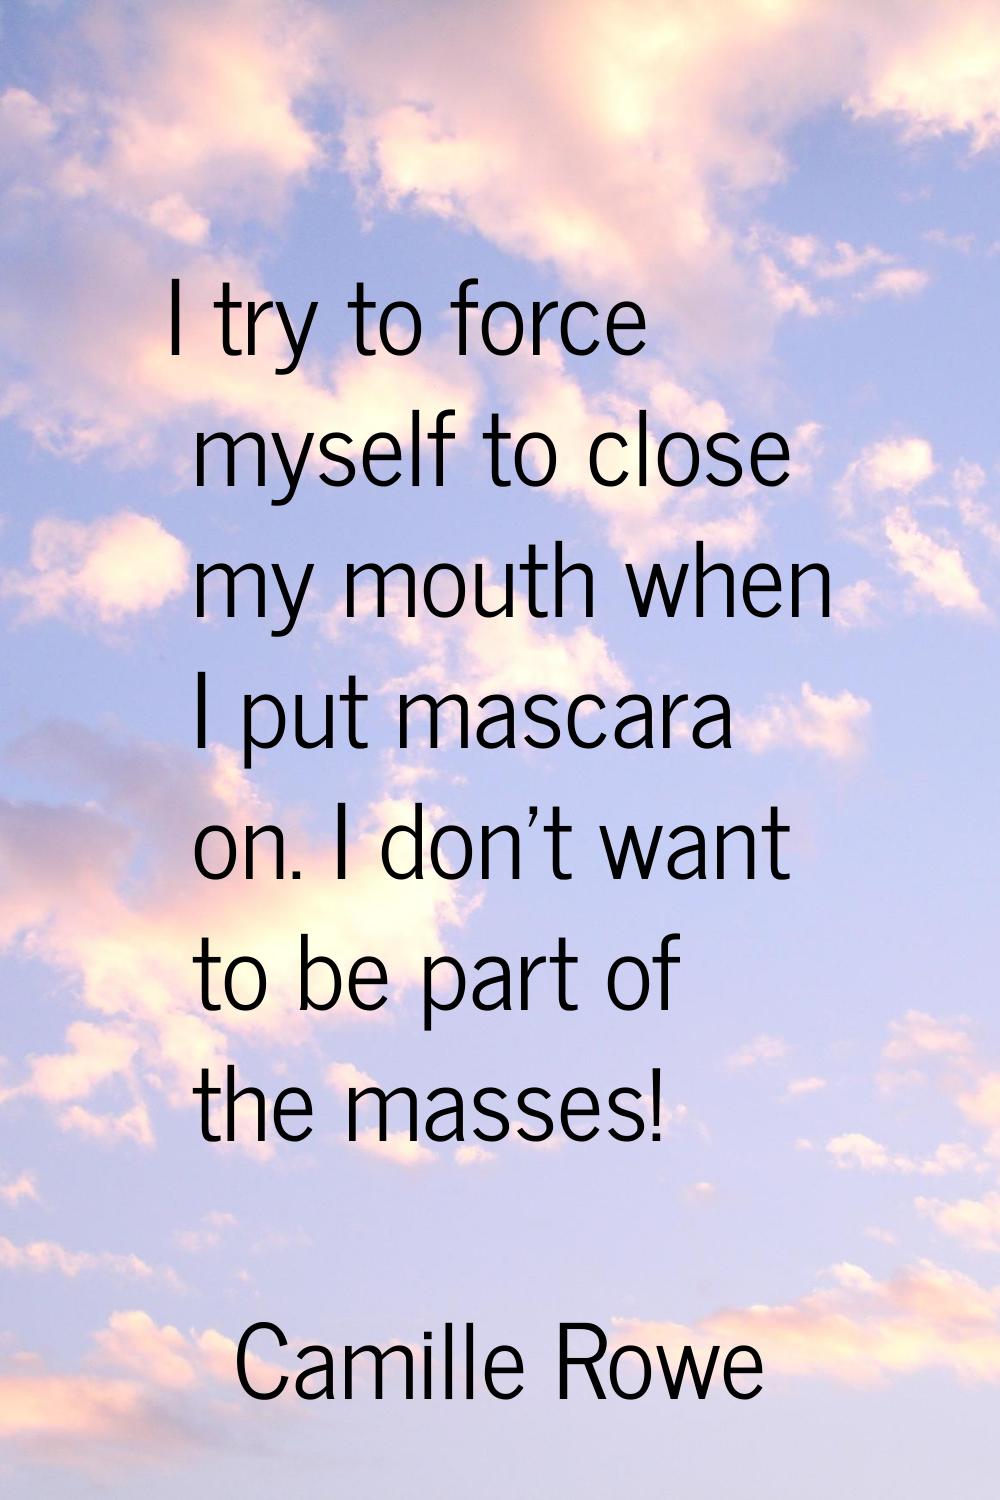 I try to force myself to close my mouth when I put mascara on. I don't want to be part of the masse